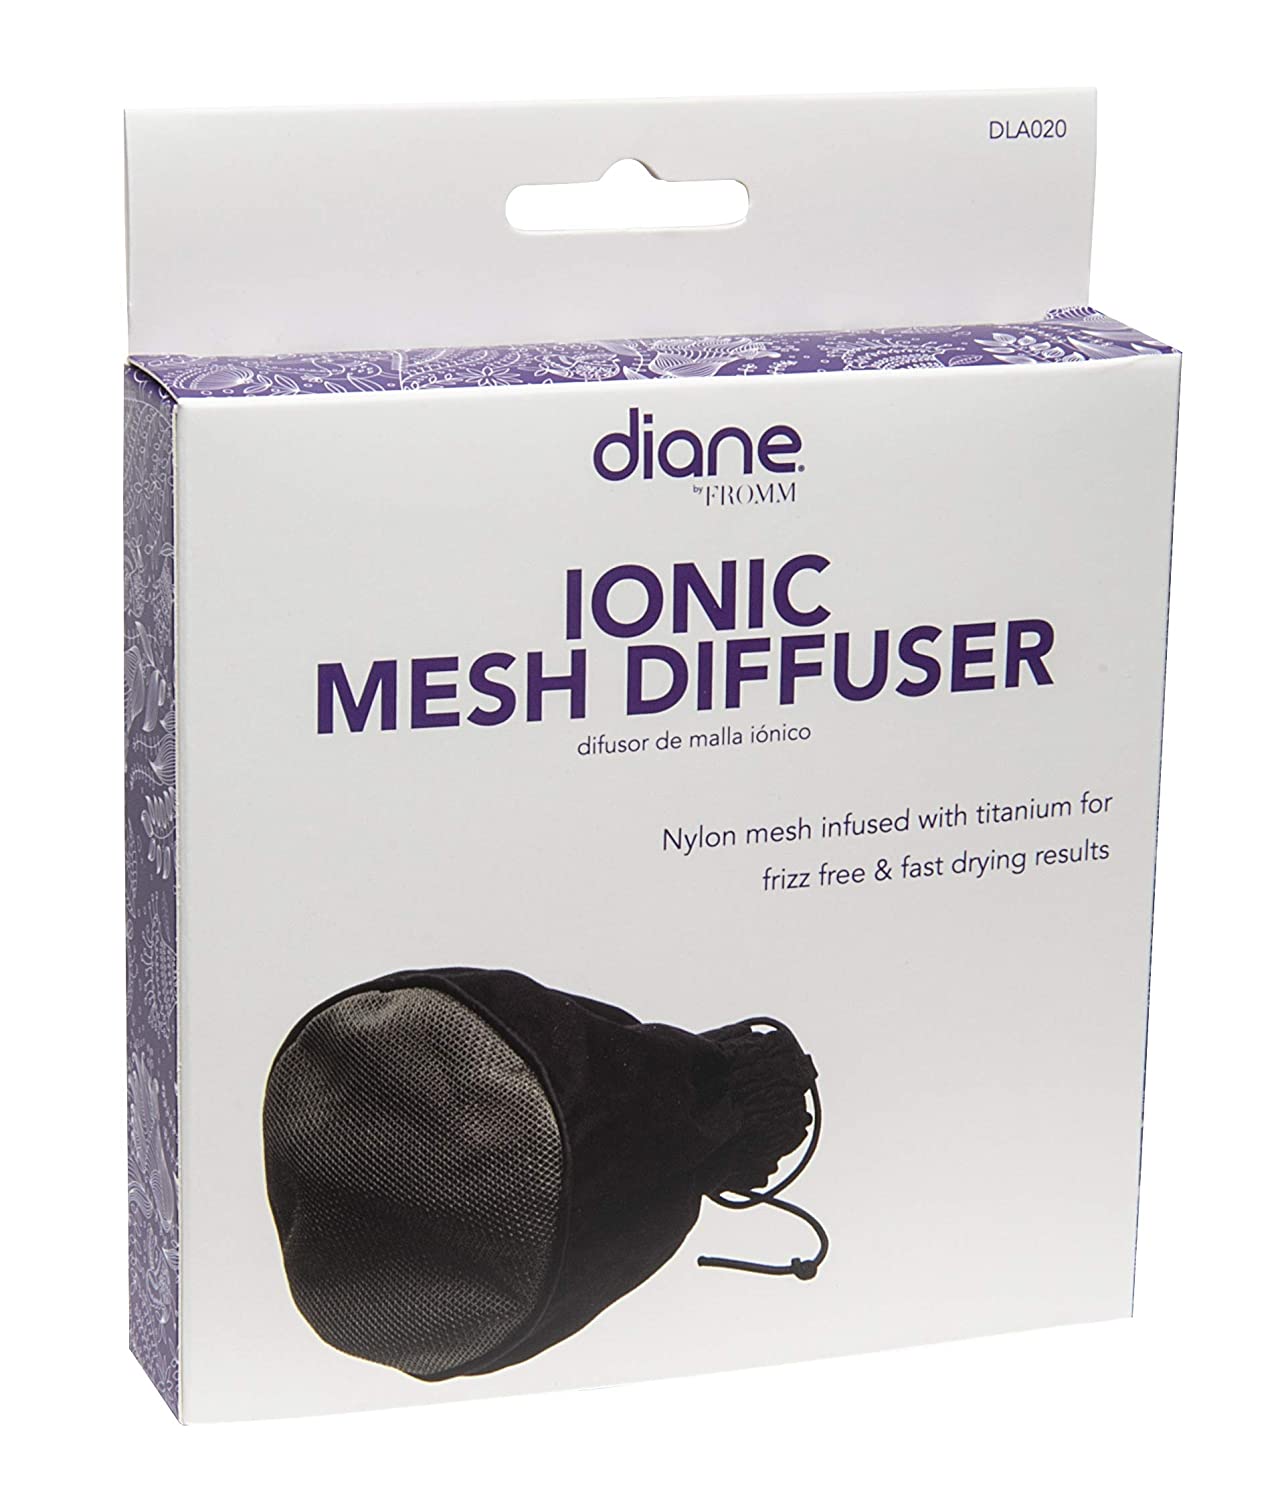 Fromm Compact & Flexible Mesh Diffuser, 1 Pound